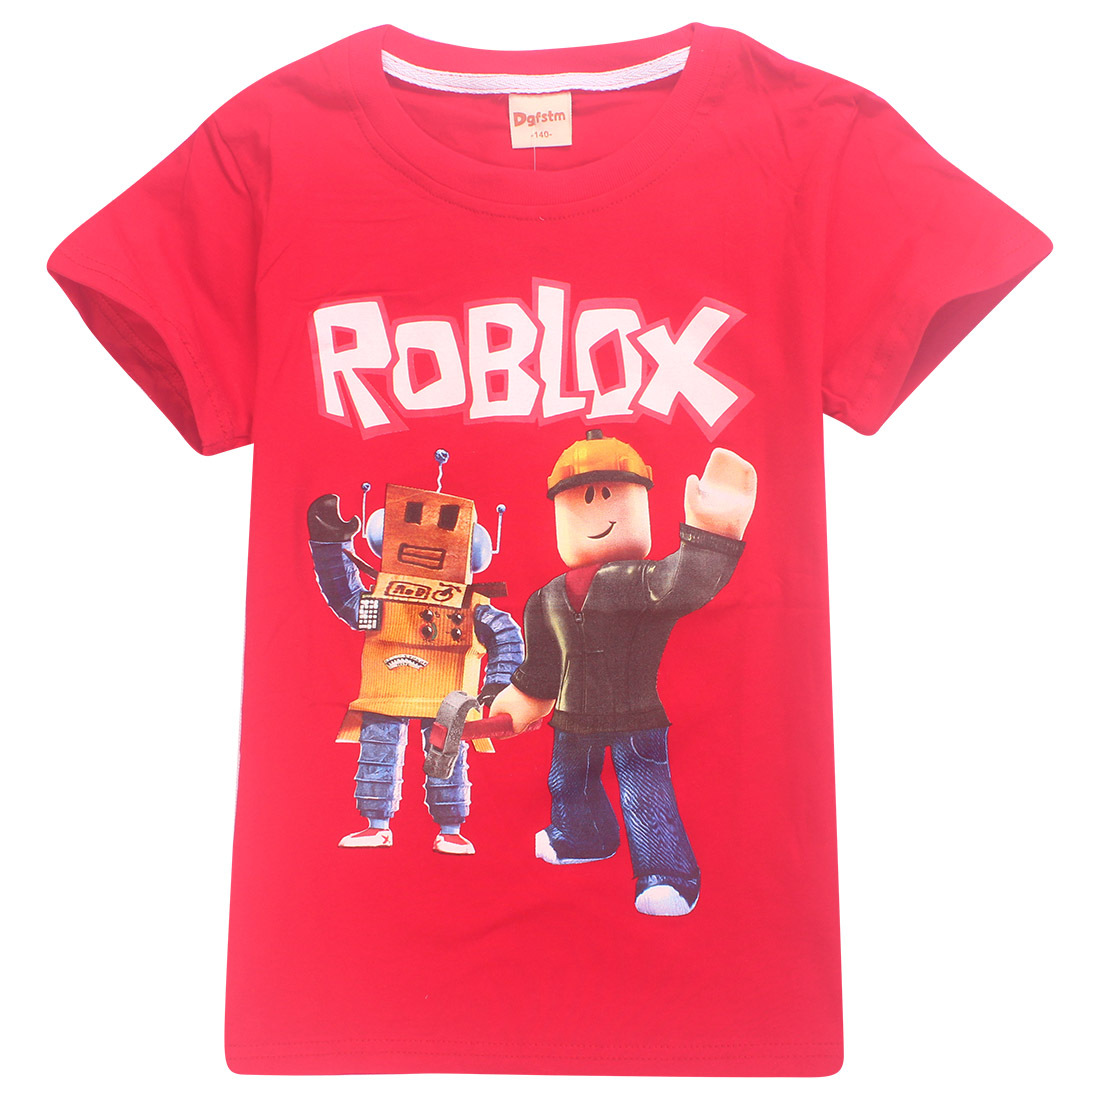 Top 10 Roblox Costumes For Kids